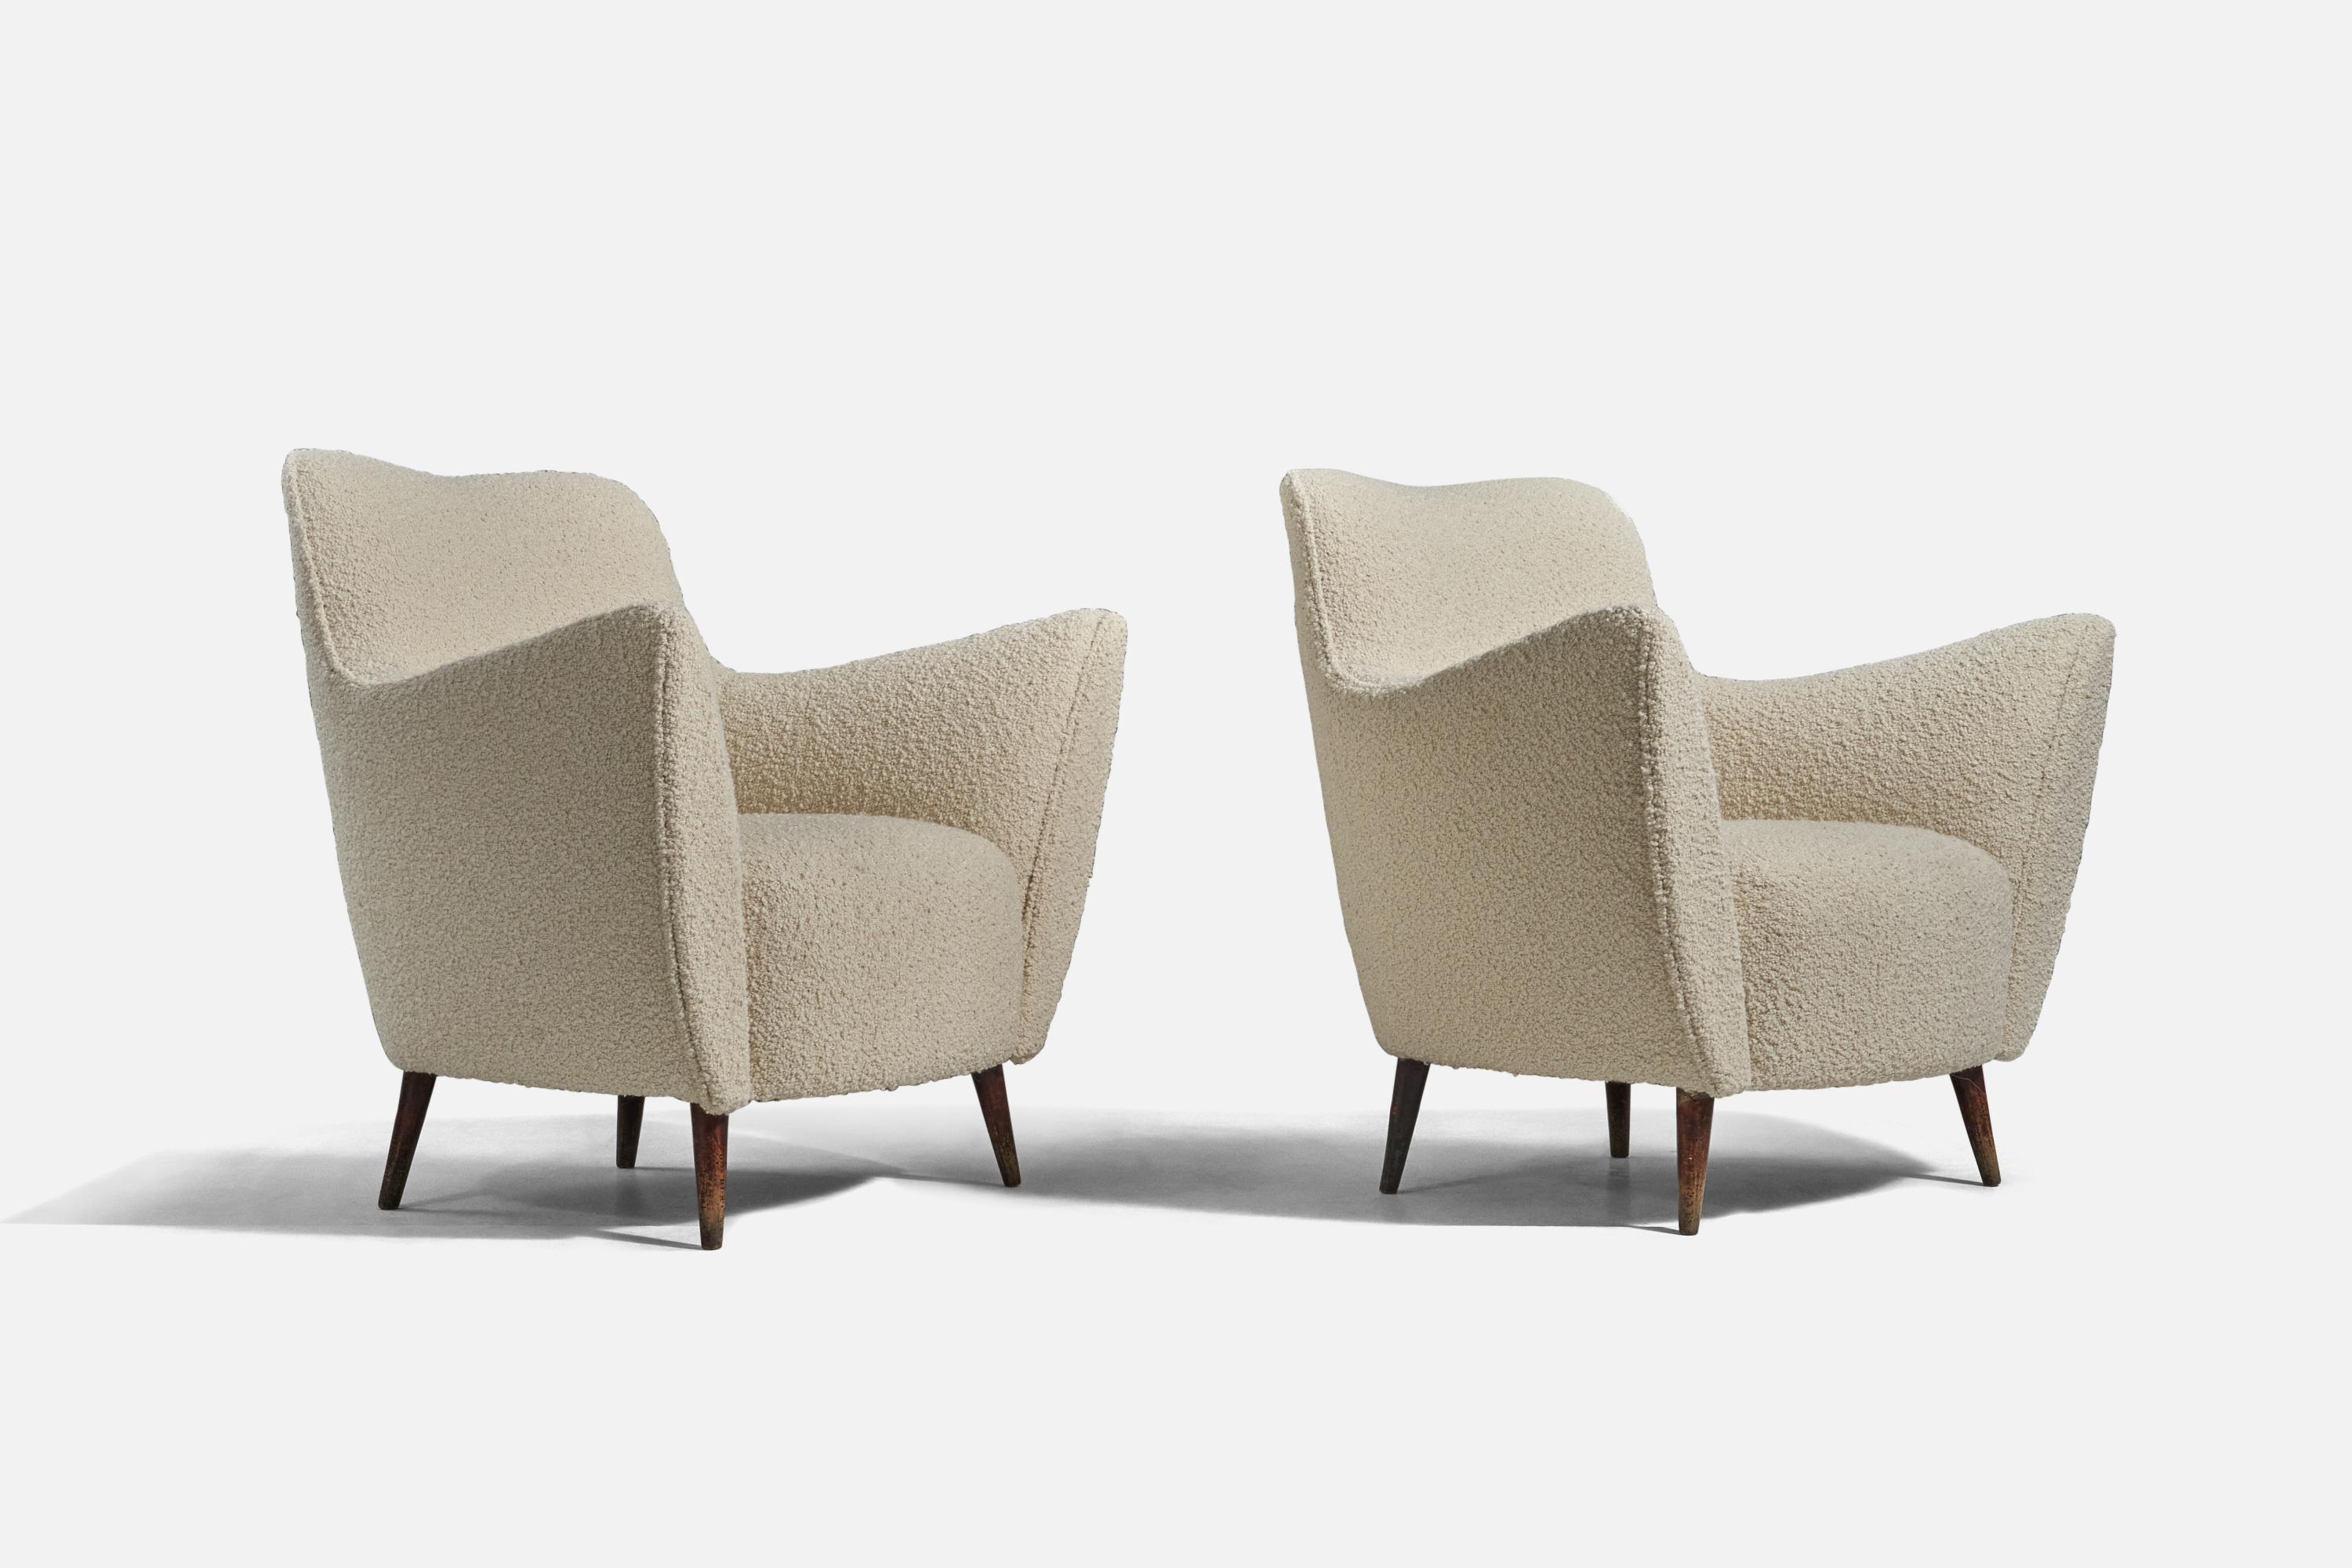 A pair of wood and white fabric lounge chairs designed by Guglielmo Veronesi and produced by ISA Bergamo, Italy, 1950s.